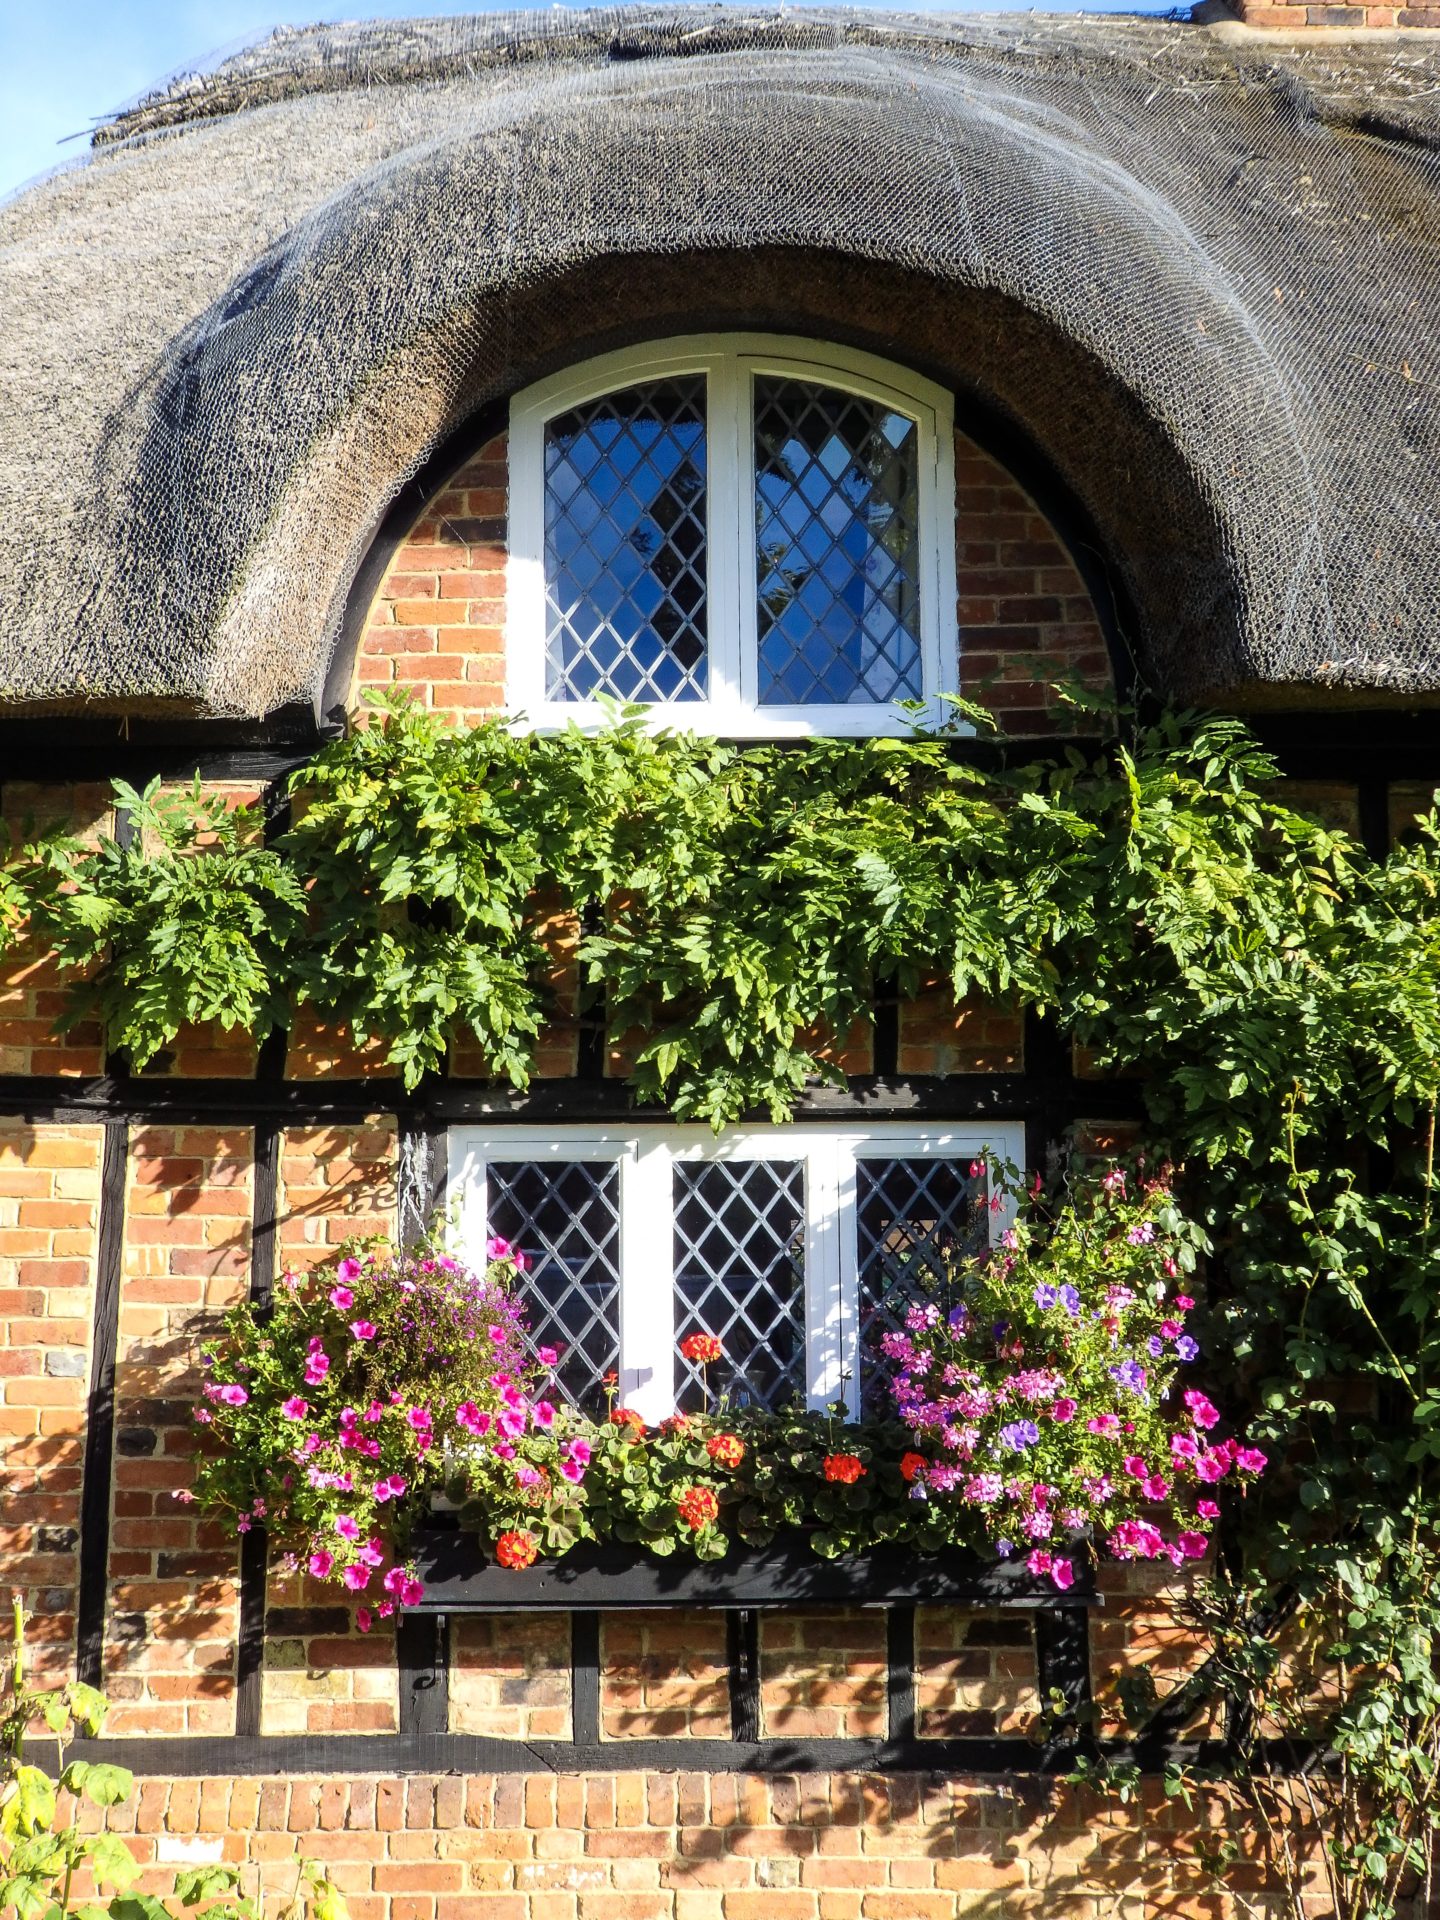 England Travel InspirationThatched Cottages of Ampthill, Bedfordshire. English Thatched Cottages at their best with beautiful summer flowers still in bloom. #england #travel